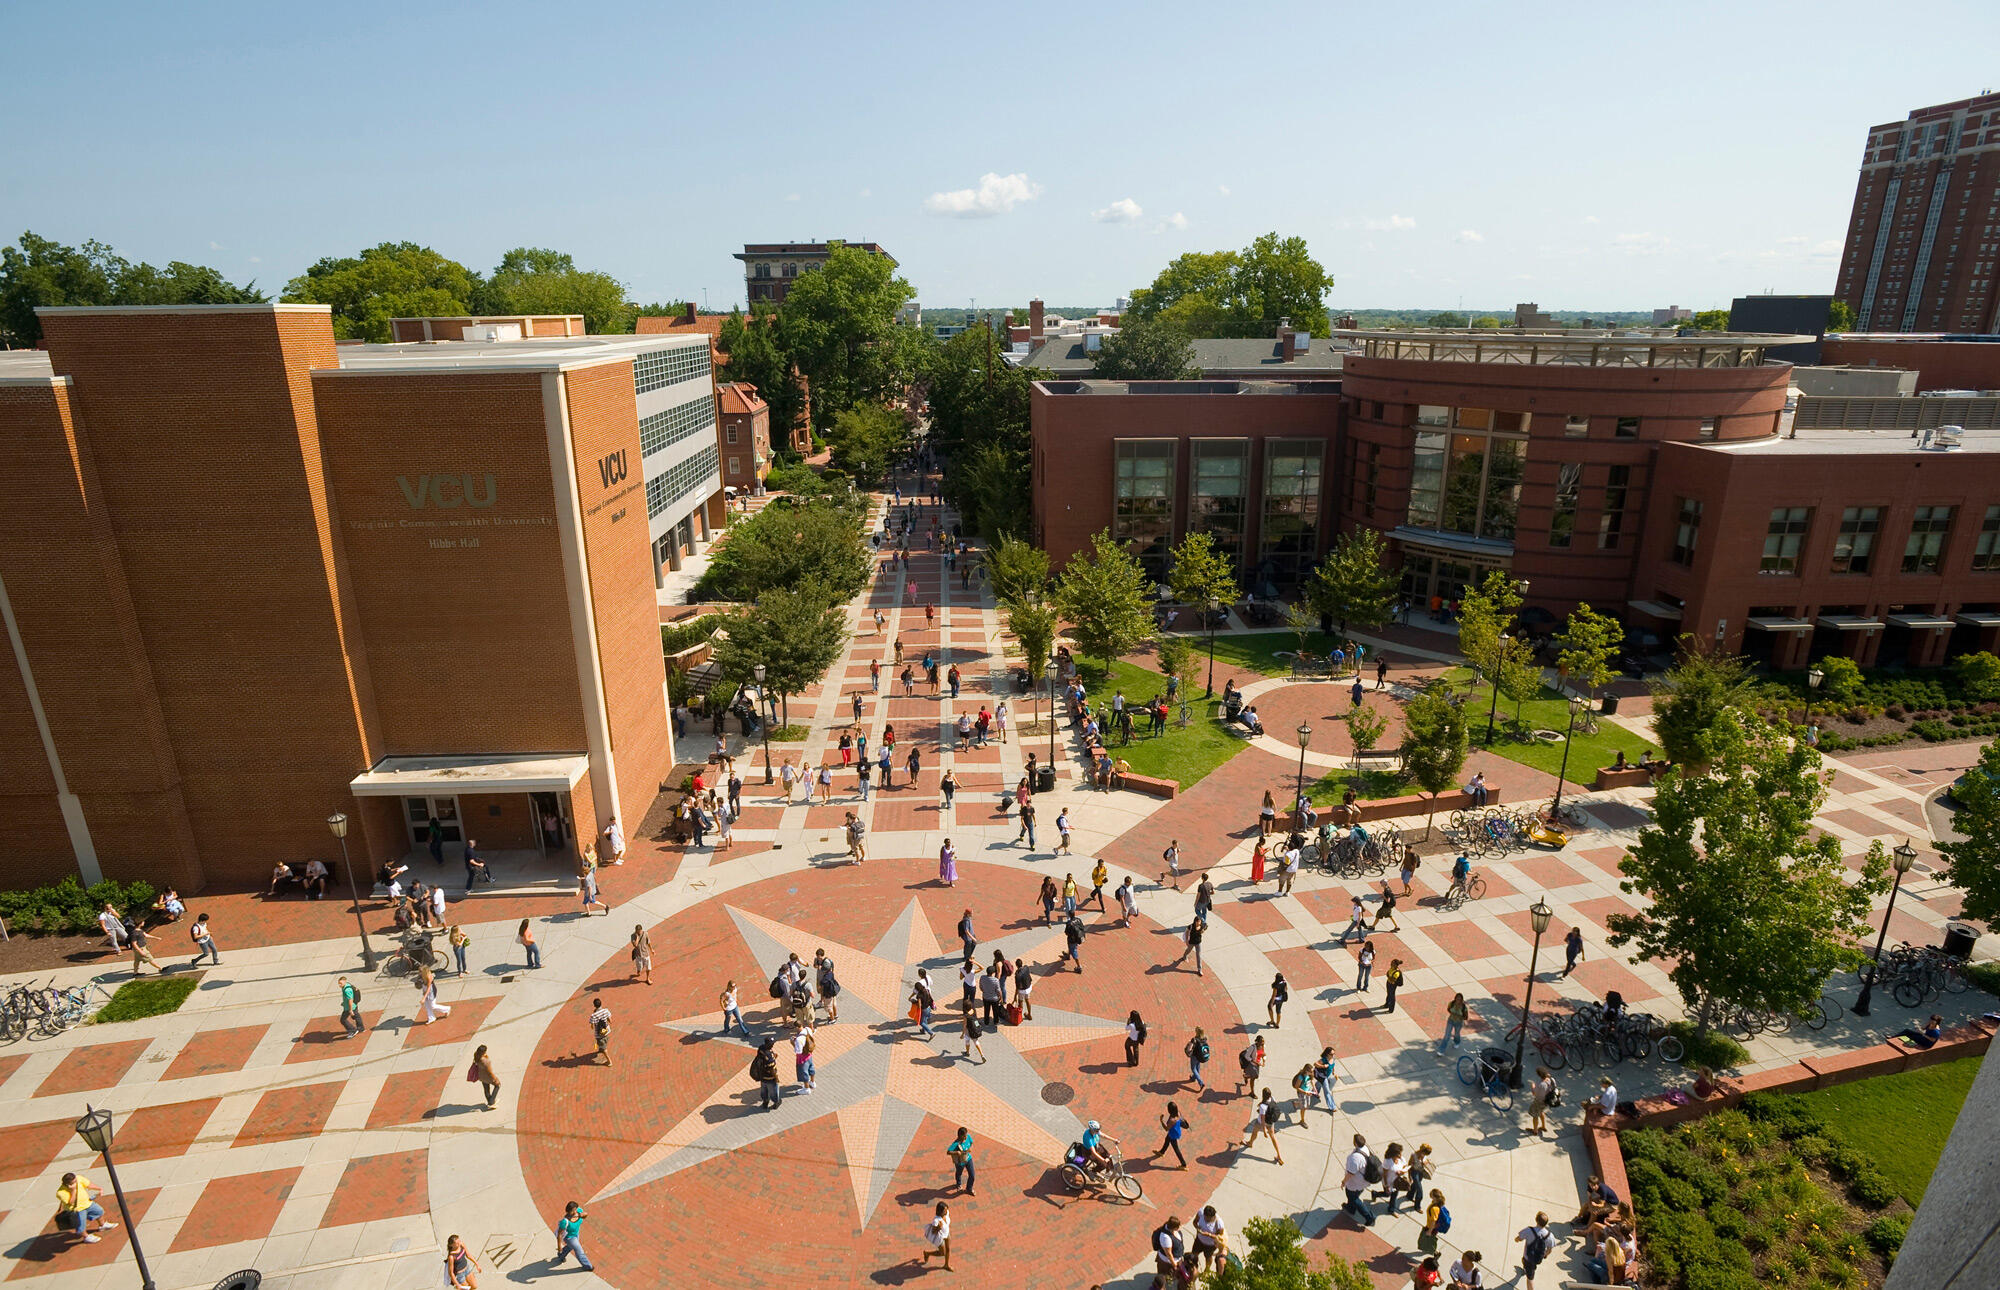 Image of VCU compass in the center of campus with students walking through.